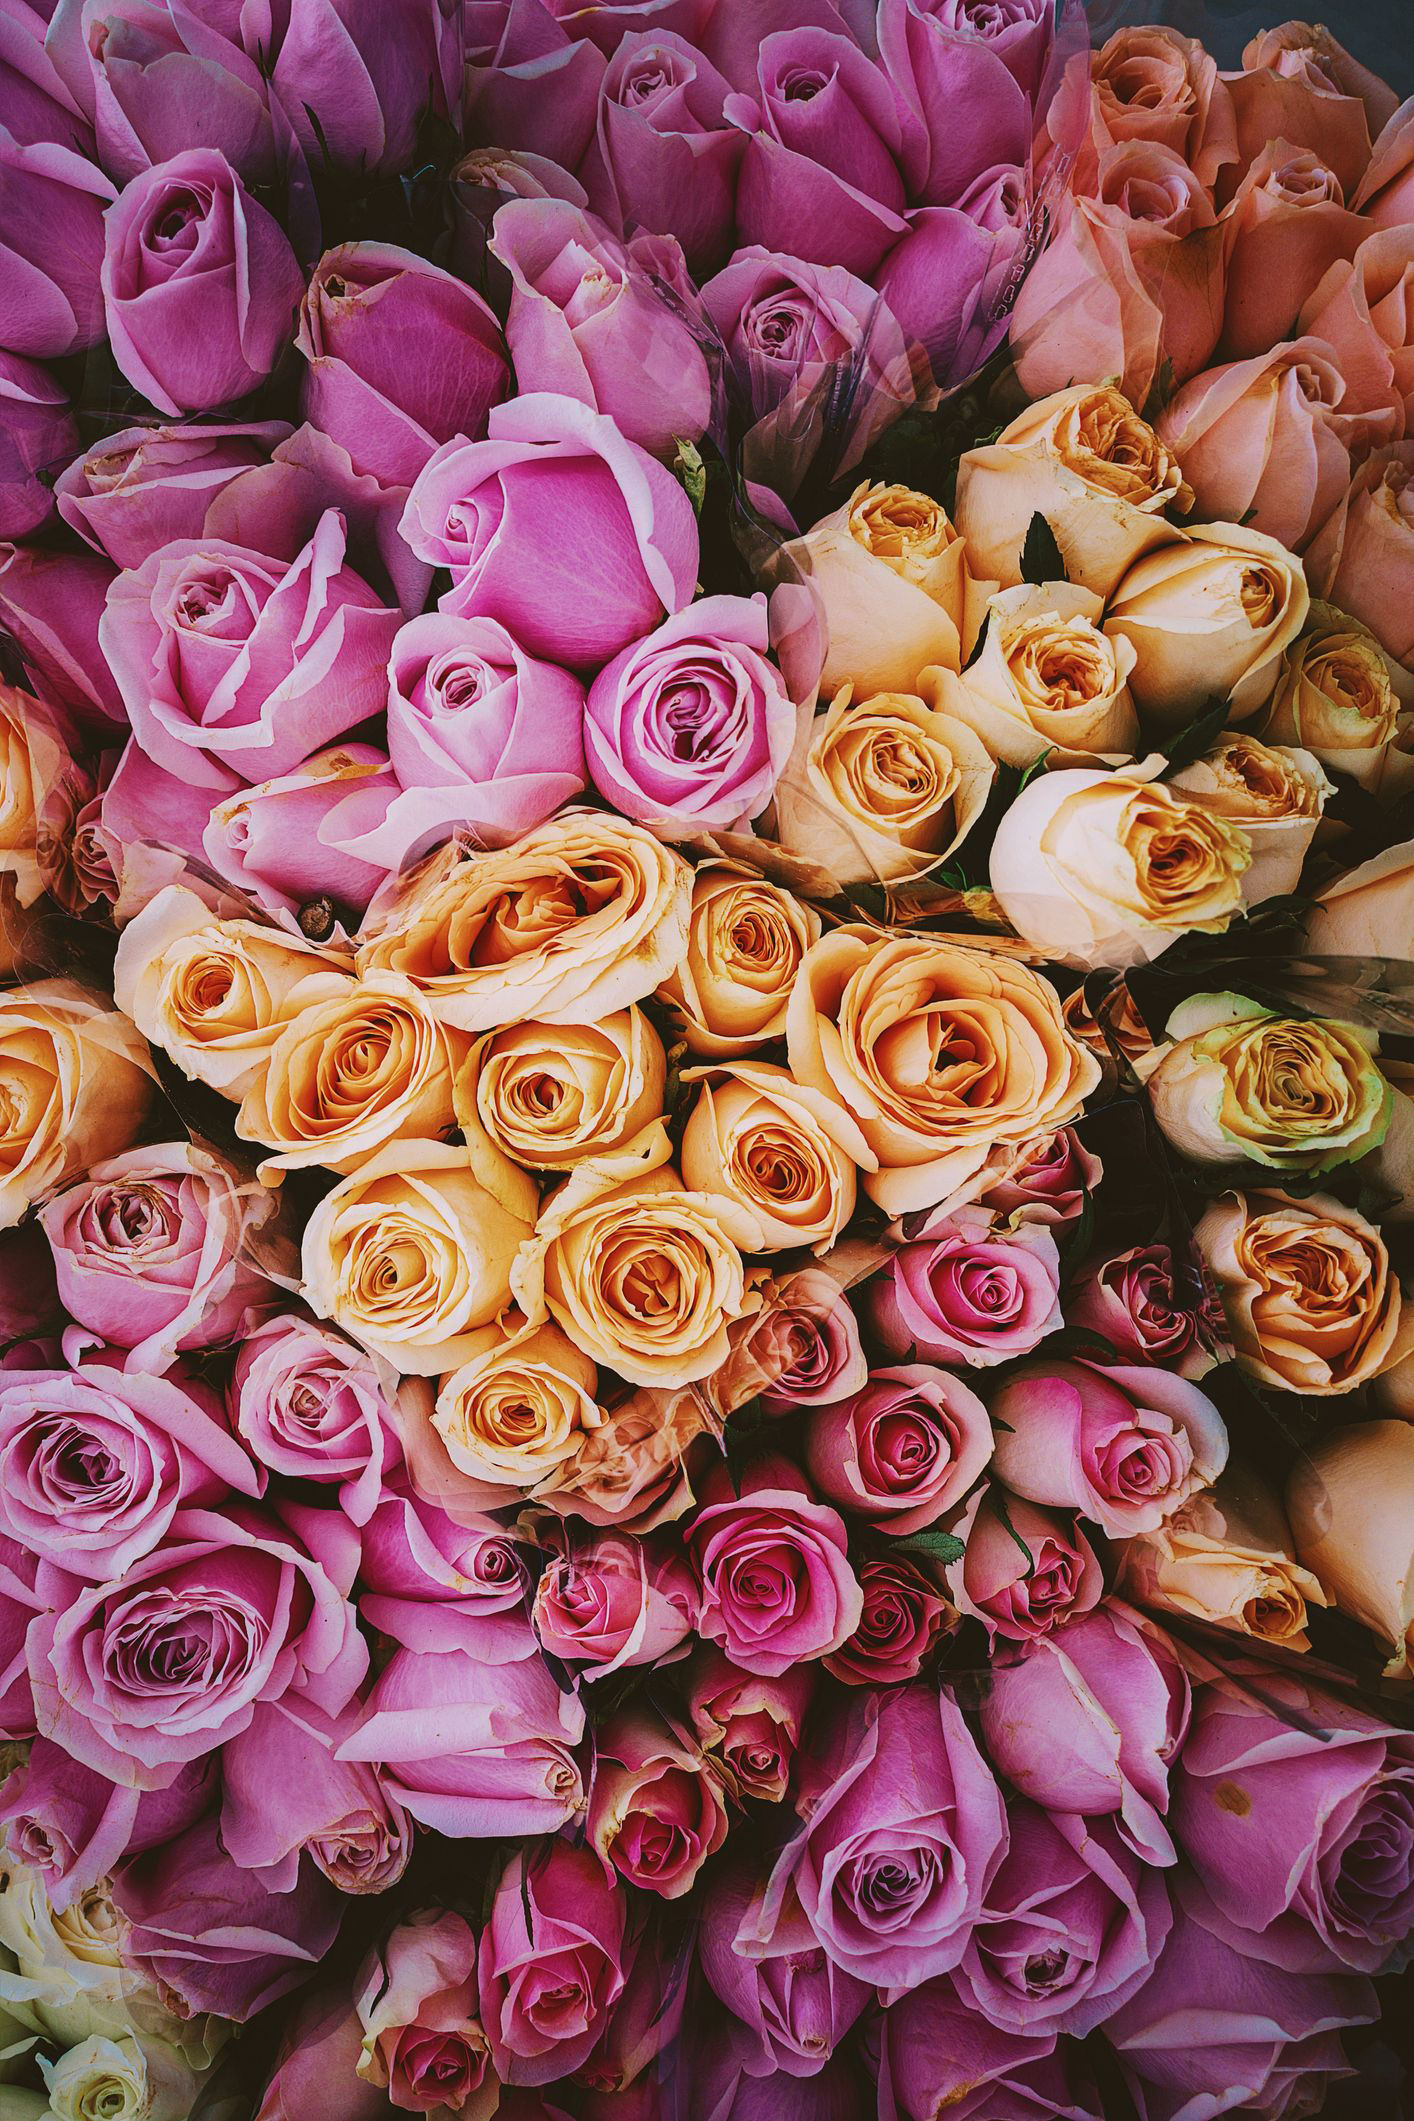 The Hidden Meaning Behind 11 Popular Rose Colors